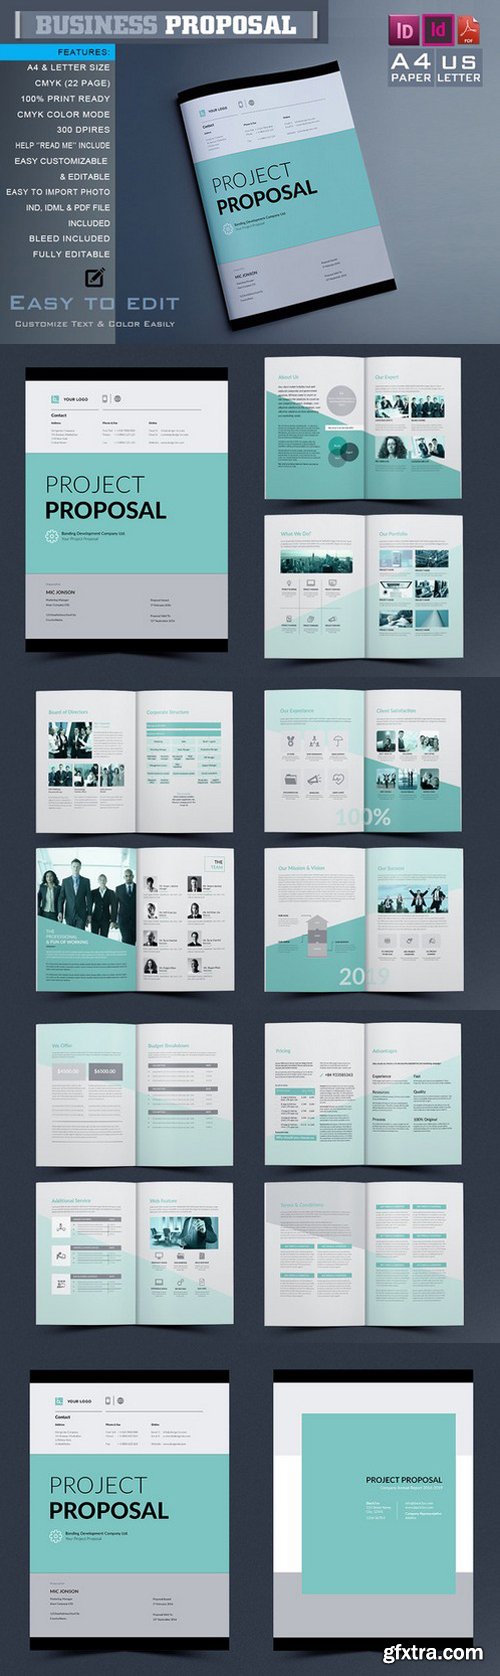 CM - Project Proposal Template 854987